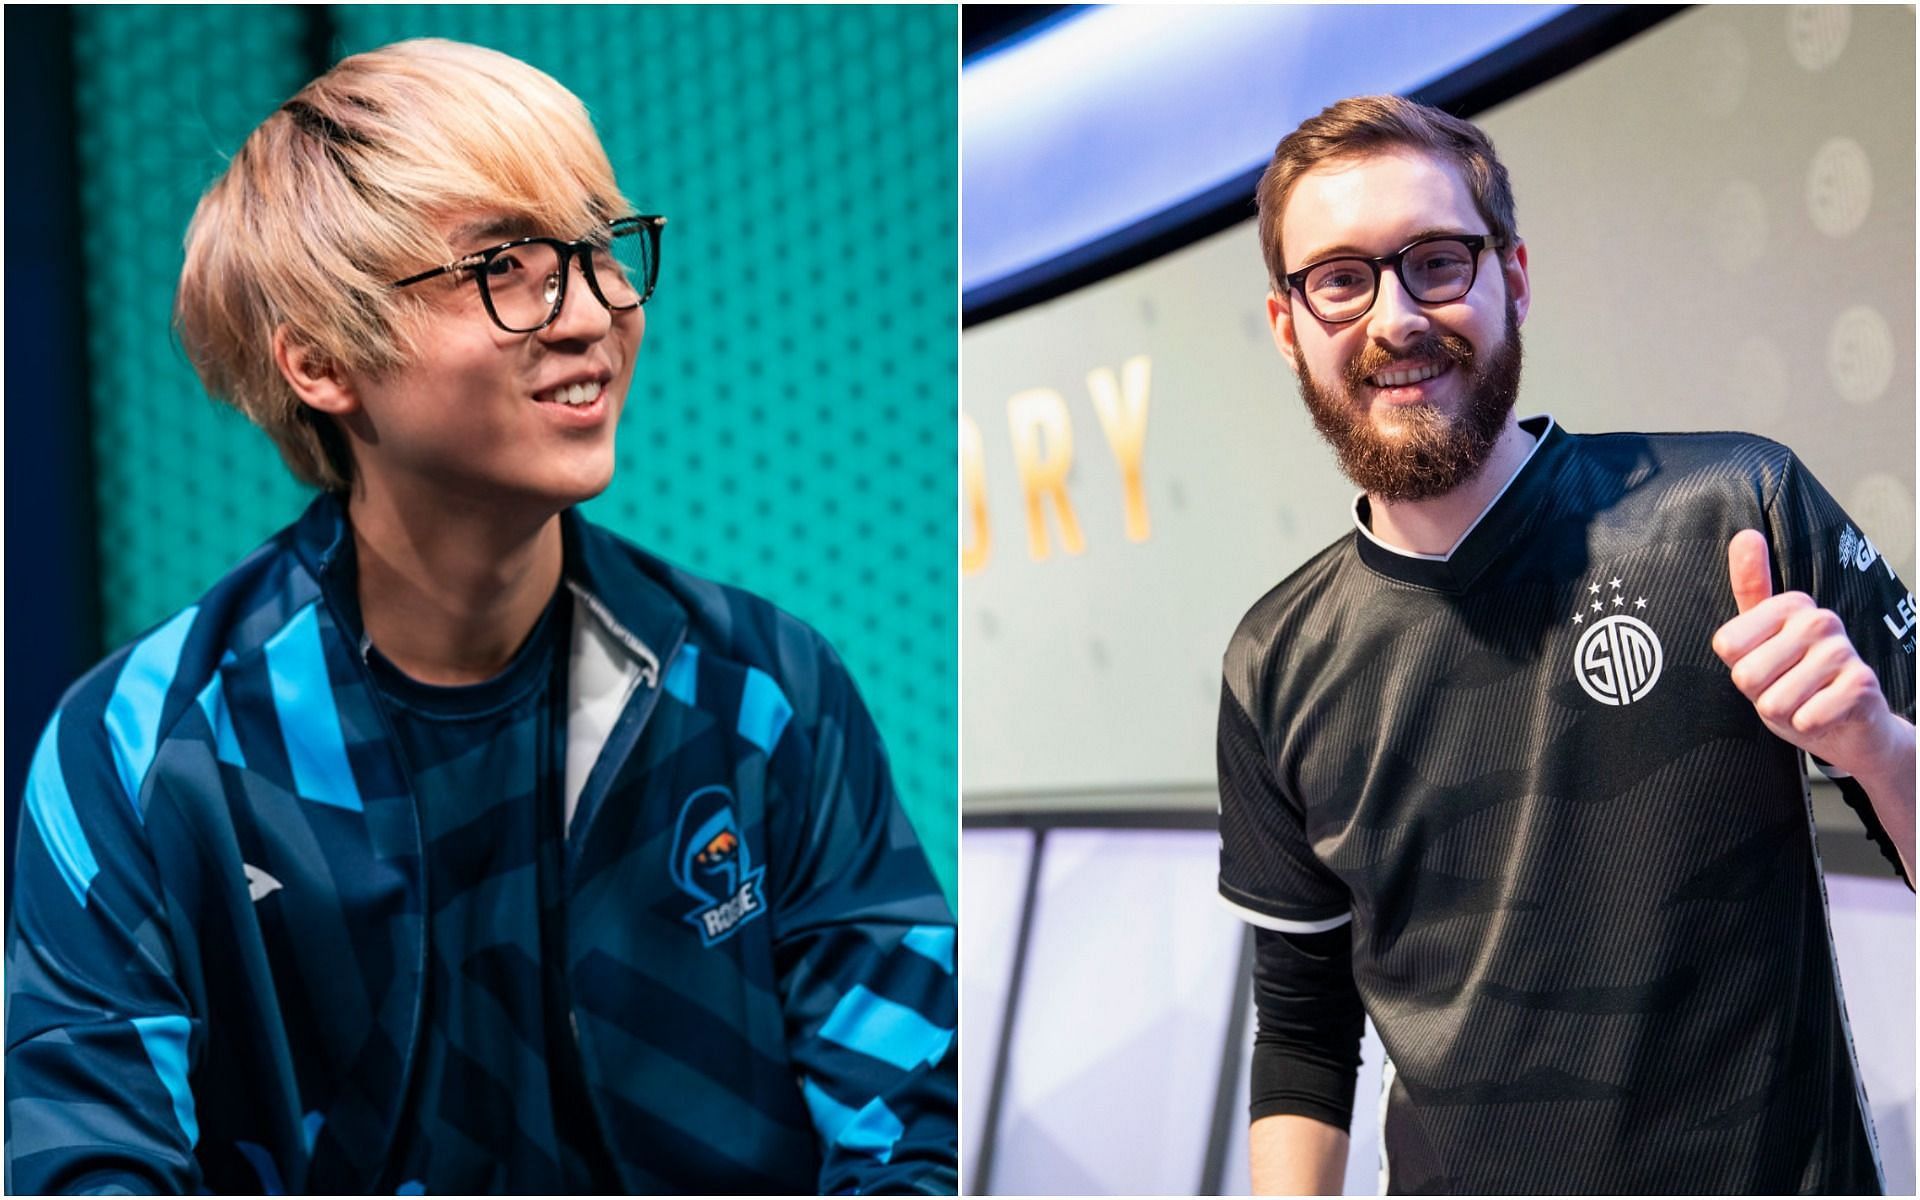 Bjergsen and Hans Sama are looking to complete the Team Liquid roster for Season 12 (Image via League of Legends)